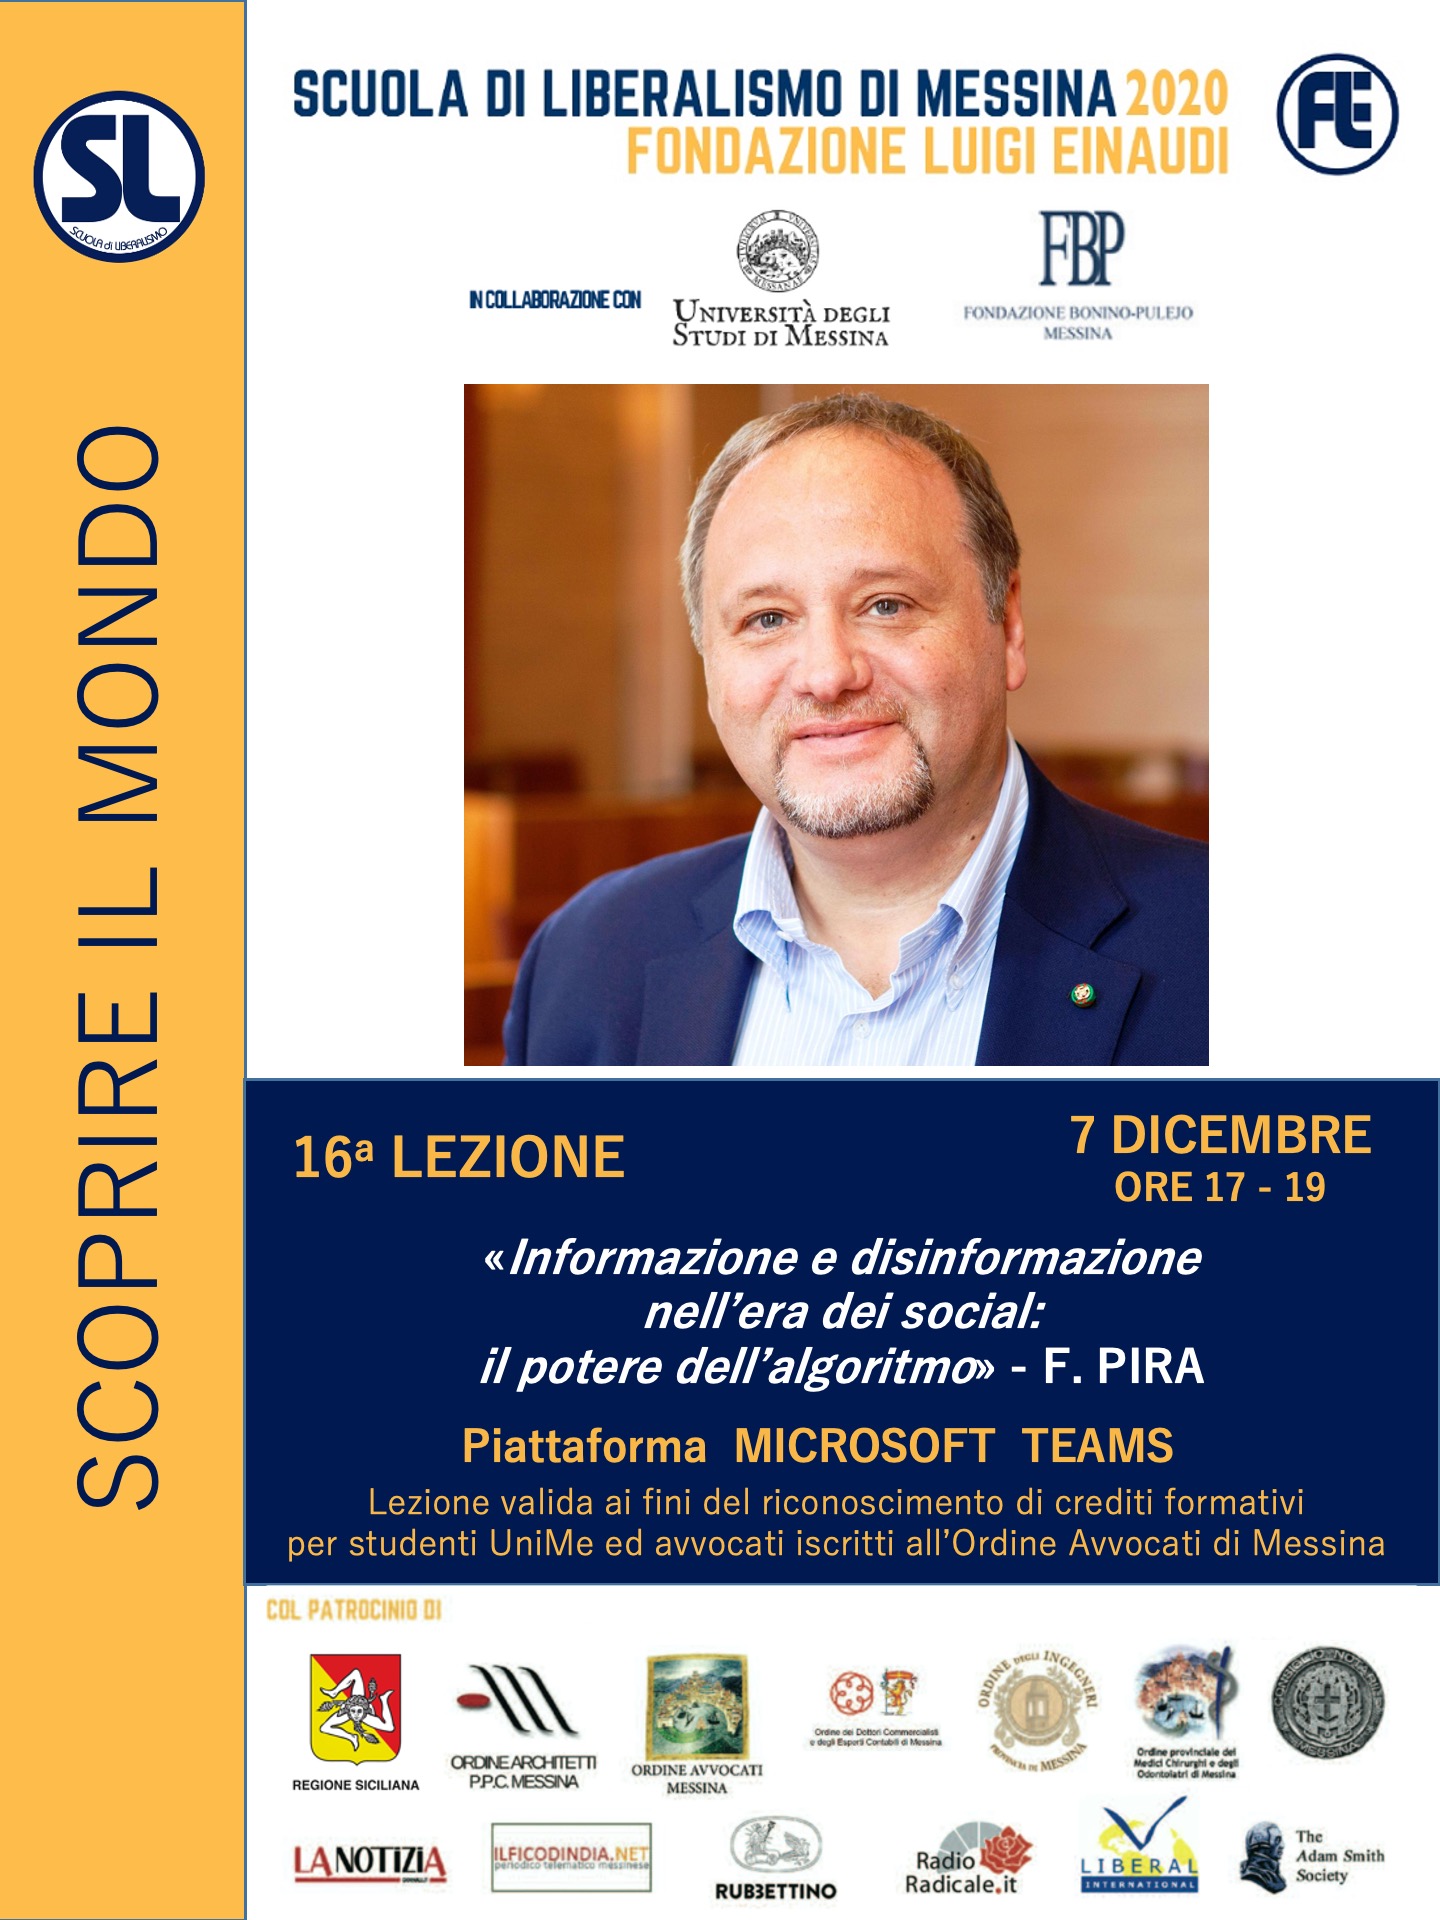 Messina, December 7, 2020. School of Liberalism: Francesco Pira gives the lecture